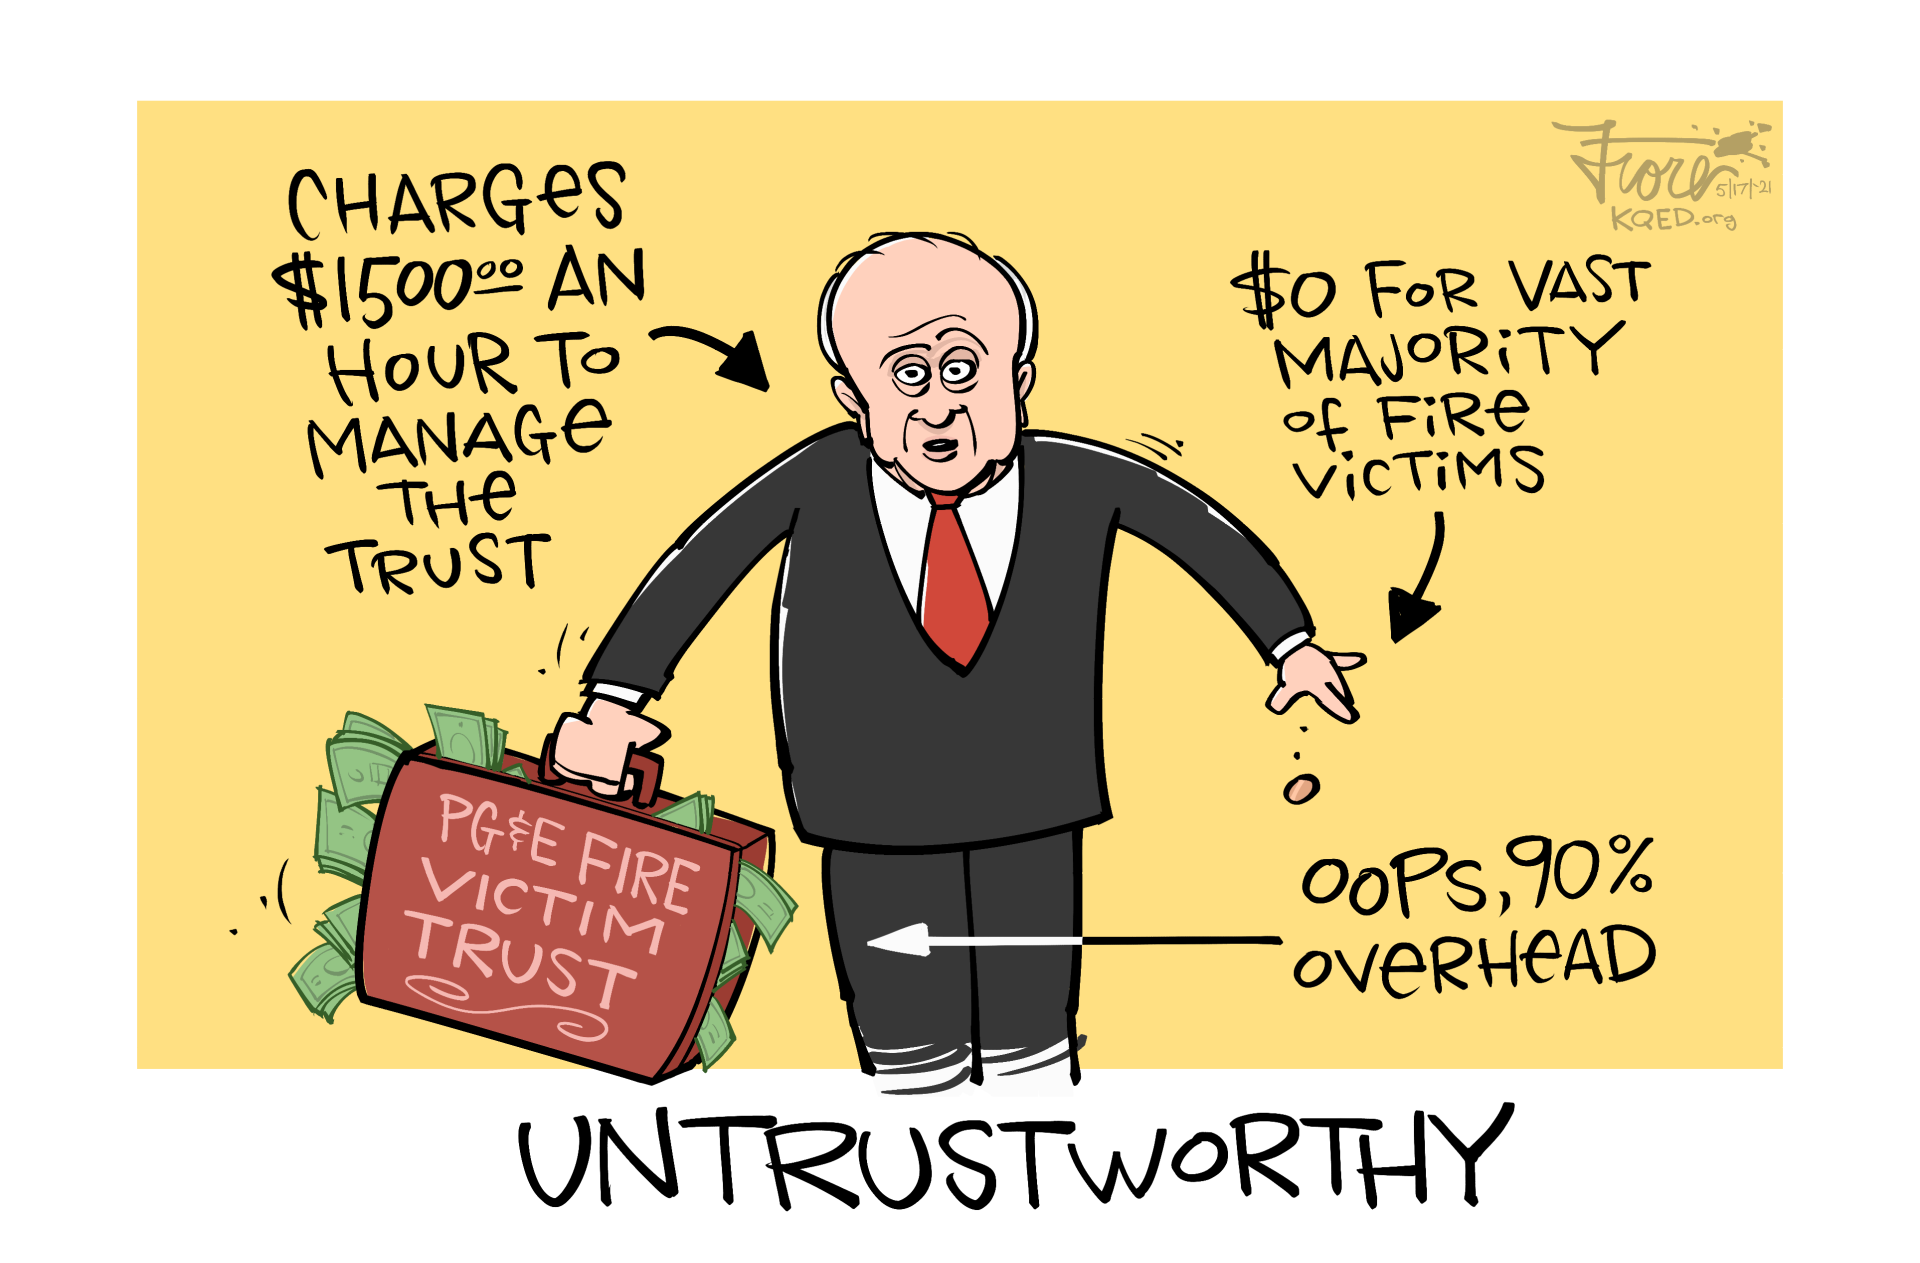 A Mark Fiore cartoon highlighting the outrageous $1,500 hourly rate of John Trotter, trustee of the PG&E Fire Victim Trust. Titled "Untrustworthy."